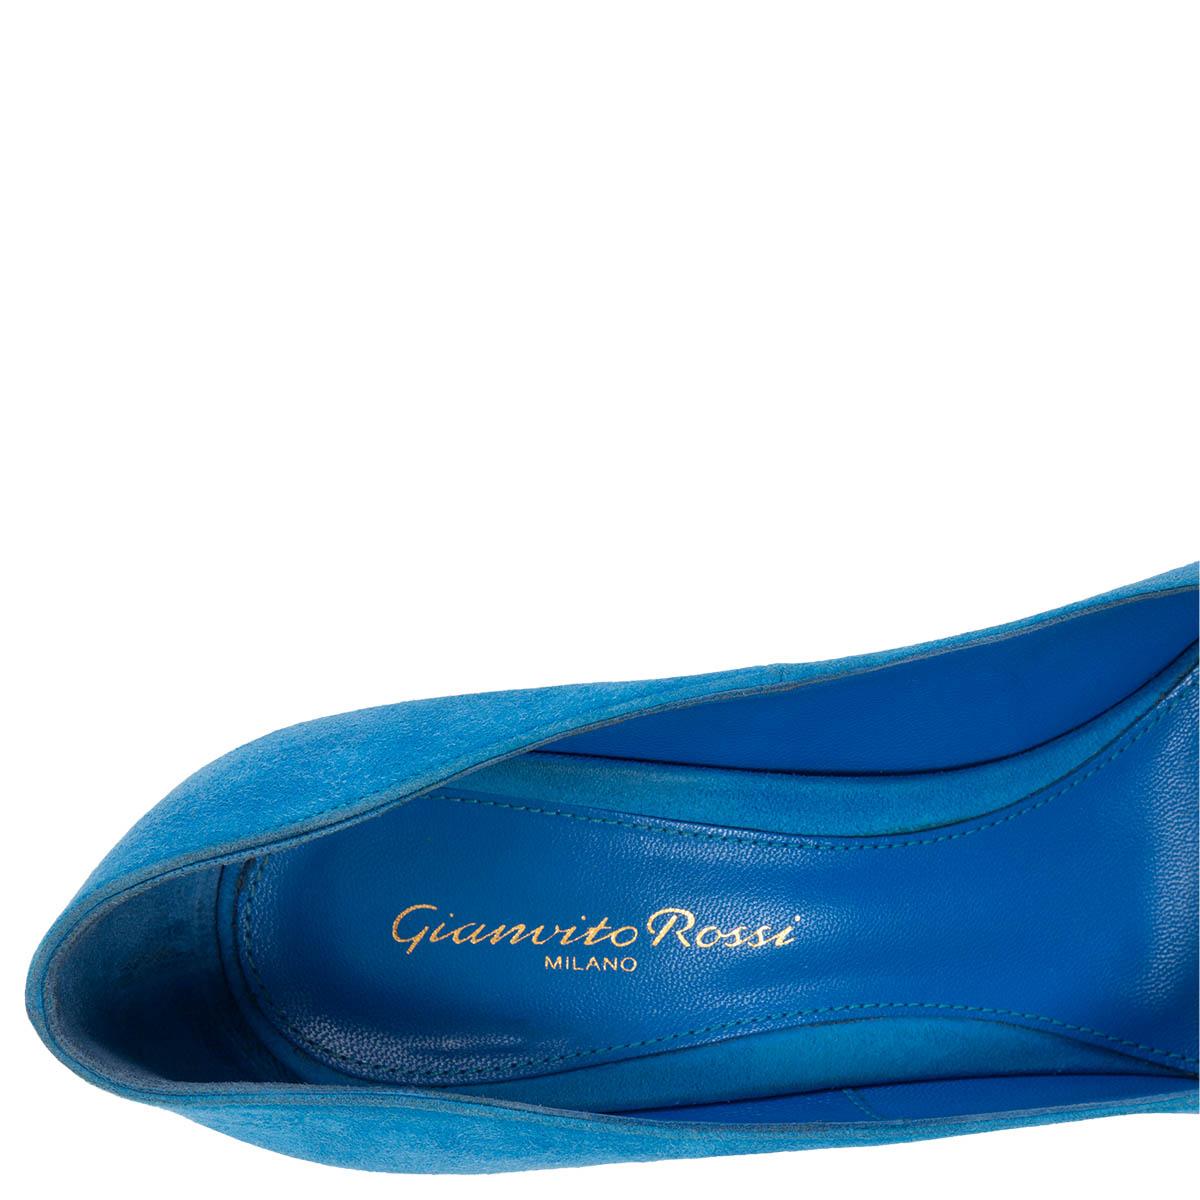 GIANVITO ROSSI azur blue suede GIANTVITO 105 Pumps Shoes 38 For Sale 1